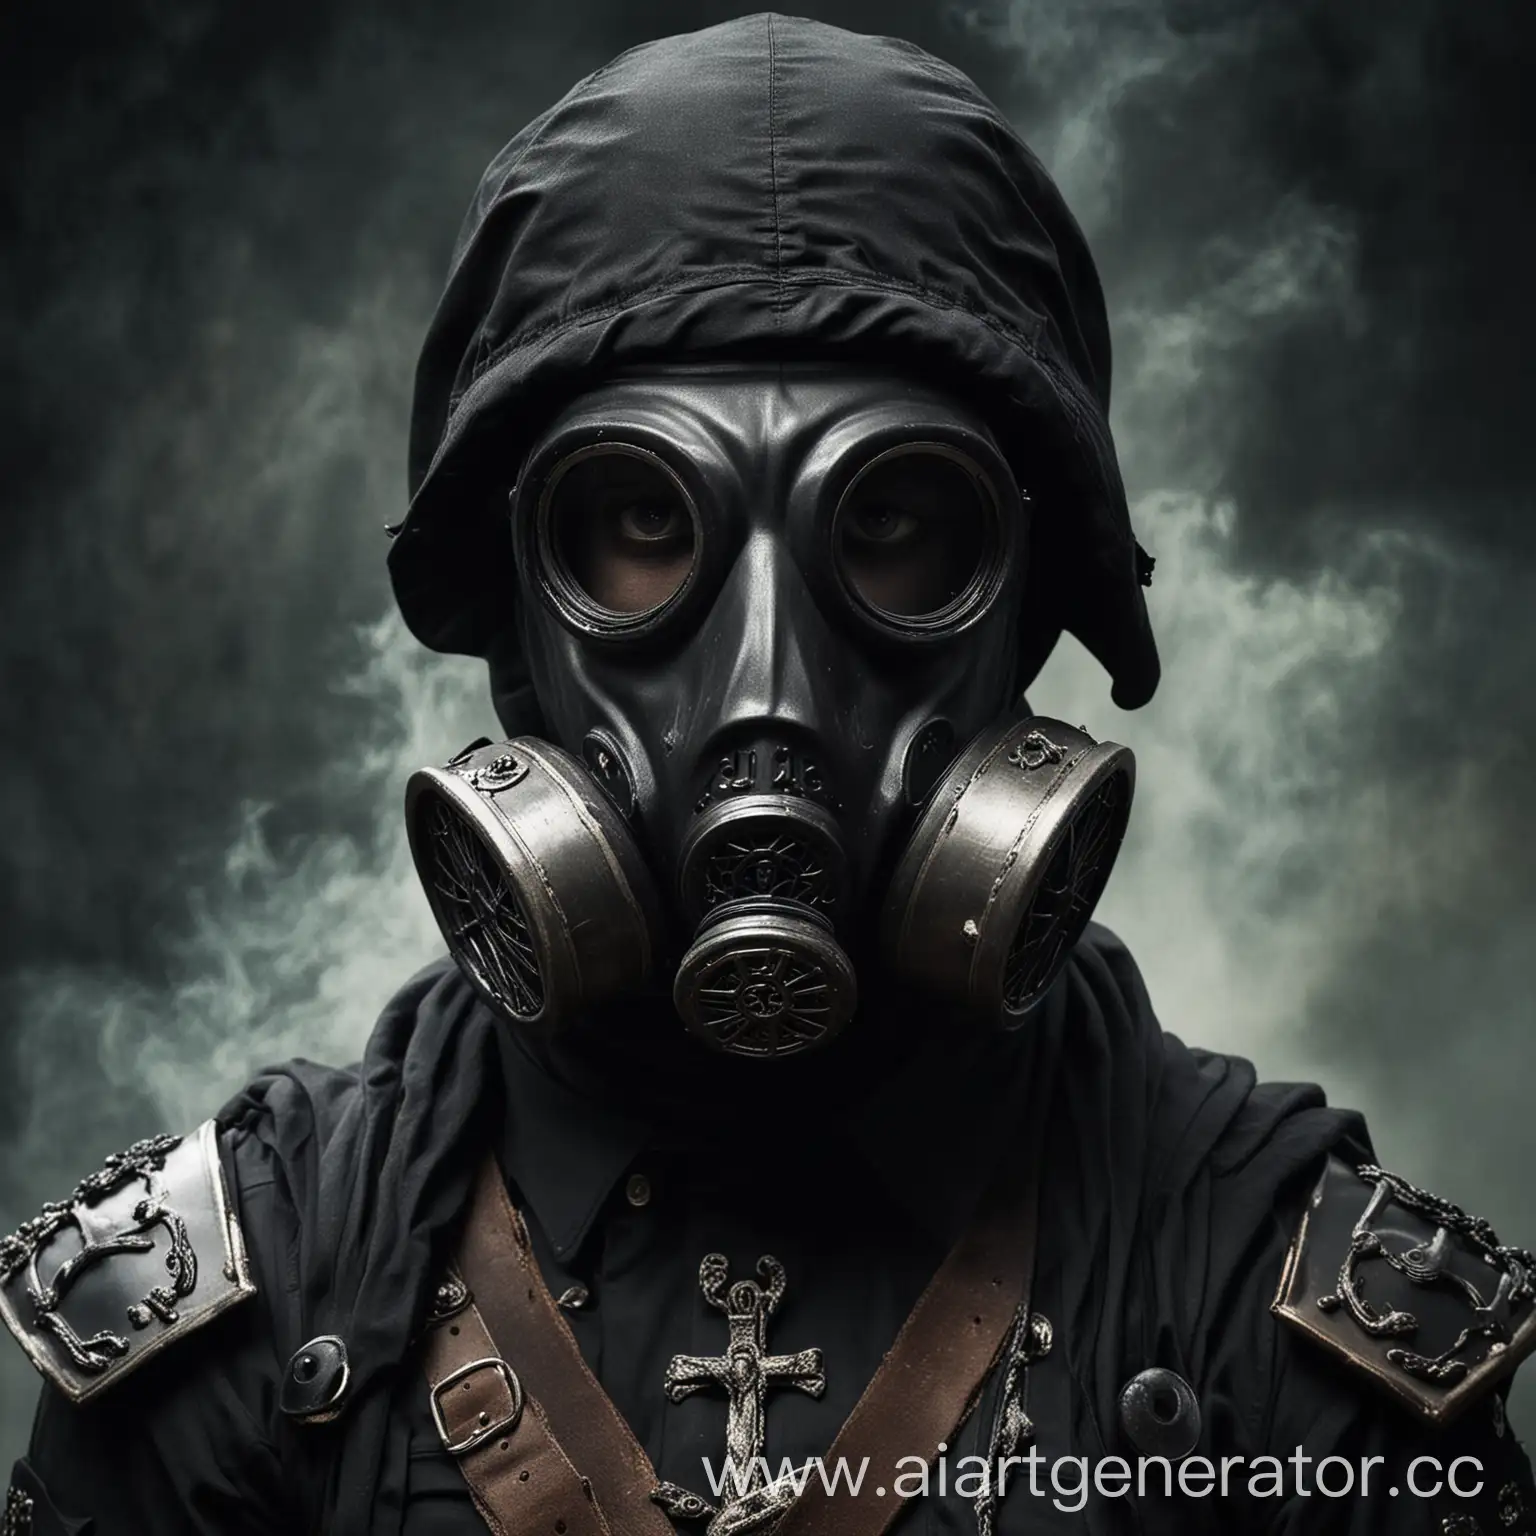 Black Gas Mask Paganism Soldier